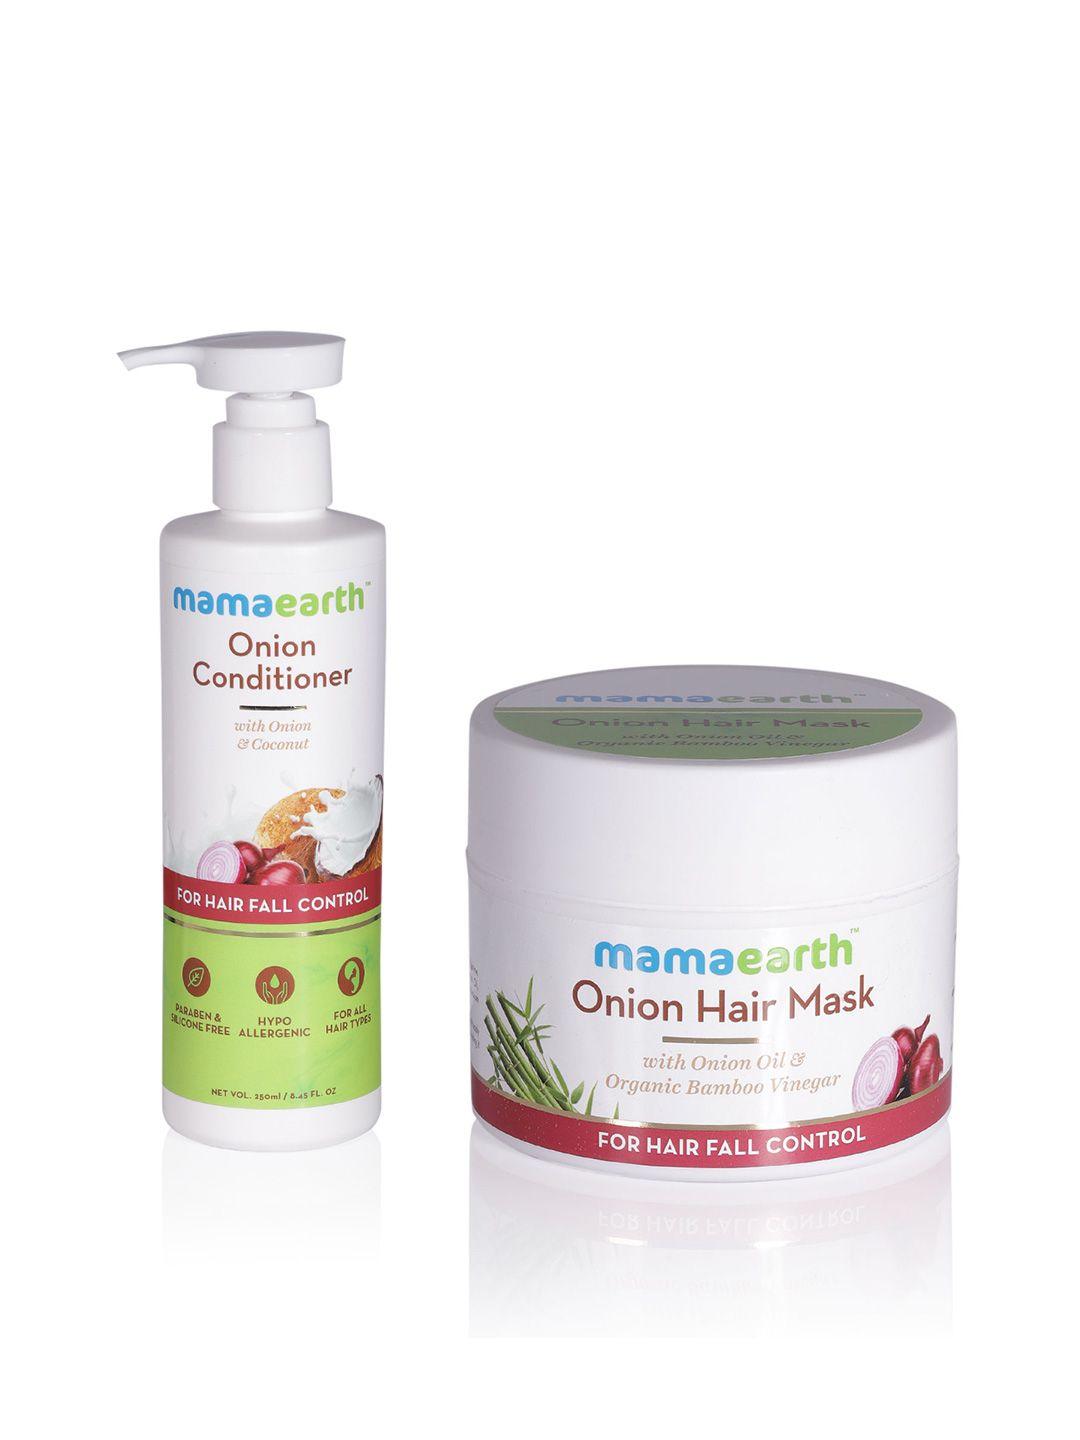 mamaearth unisex set of sustainable onion hair mask & conditioner